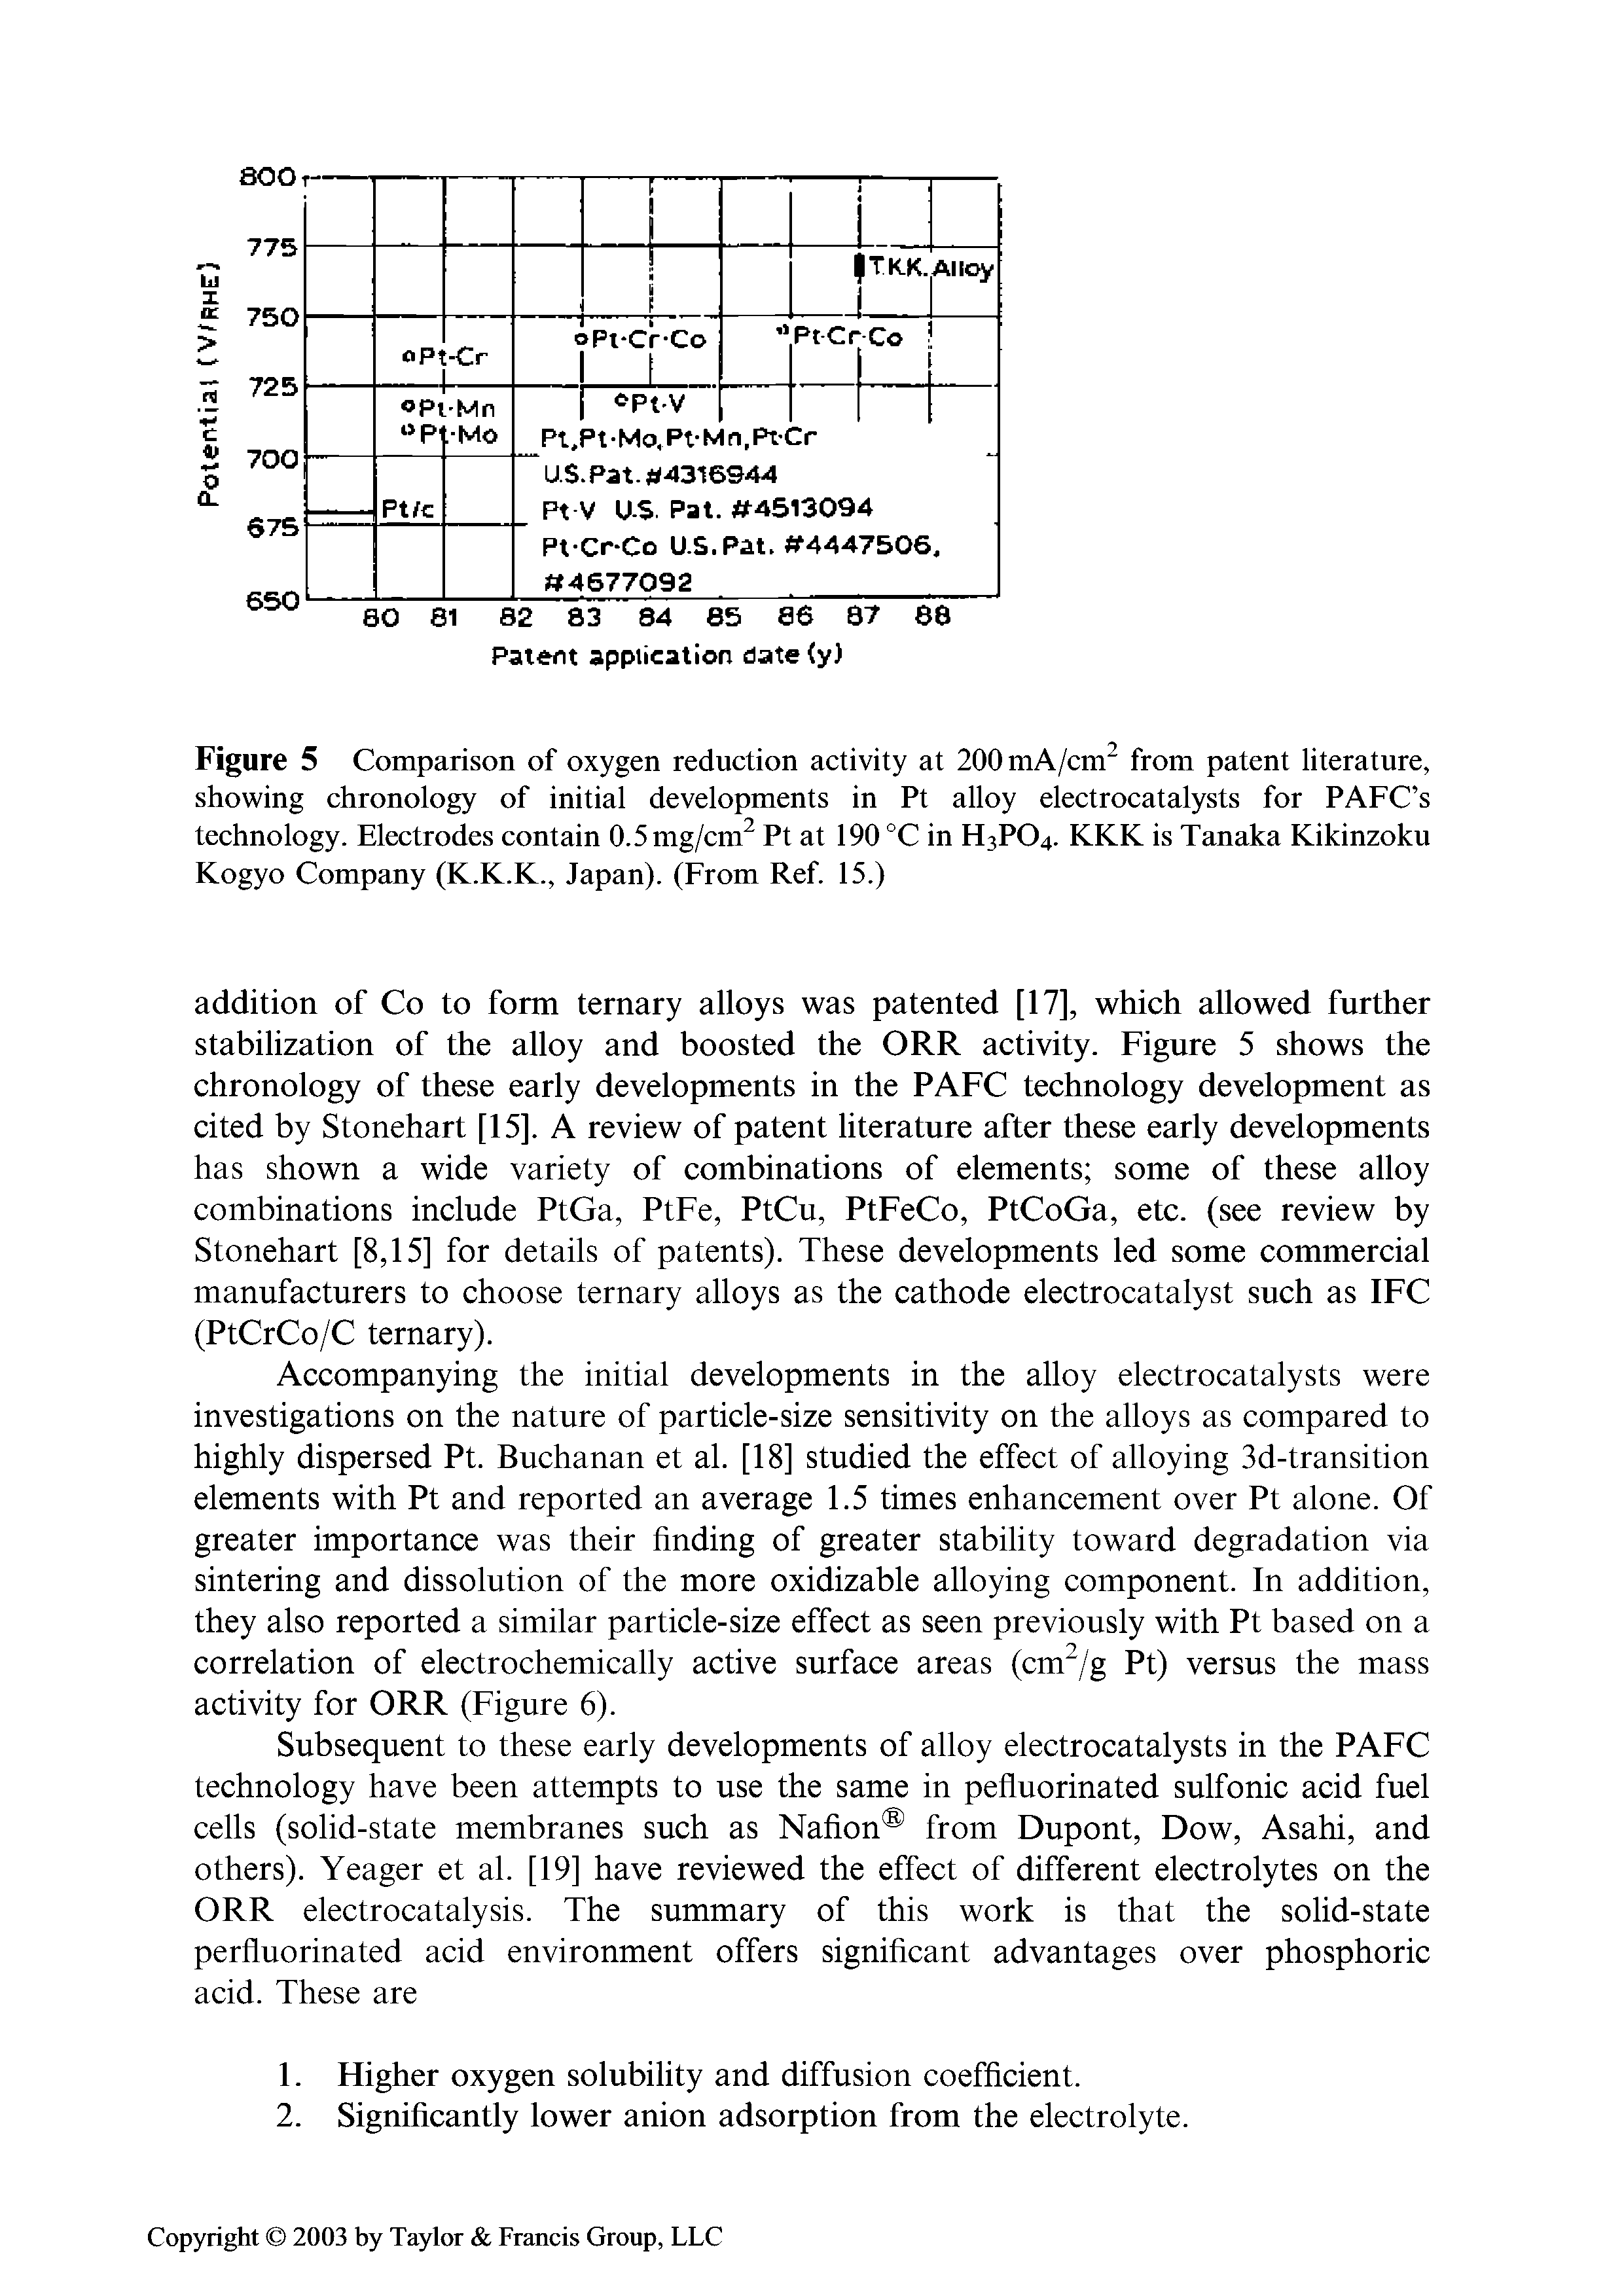 Figure 5 Comparison of oxygen reduction activity at 200mA/cm from patent literature, showing chronology of initial developments in Pt alloy electrocatalysts for PAFC s technology. Electrodes contain 0.5mg/cm Pt at 190 °C in H3PO4. KKK is Tanaka Kikinzoku Kogyo Company (K.K.K., Japan). (From Ref. 15.)...